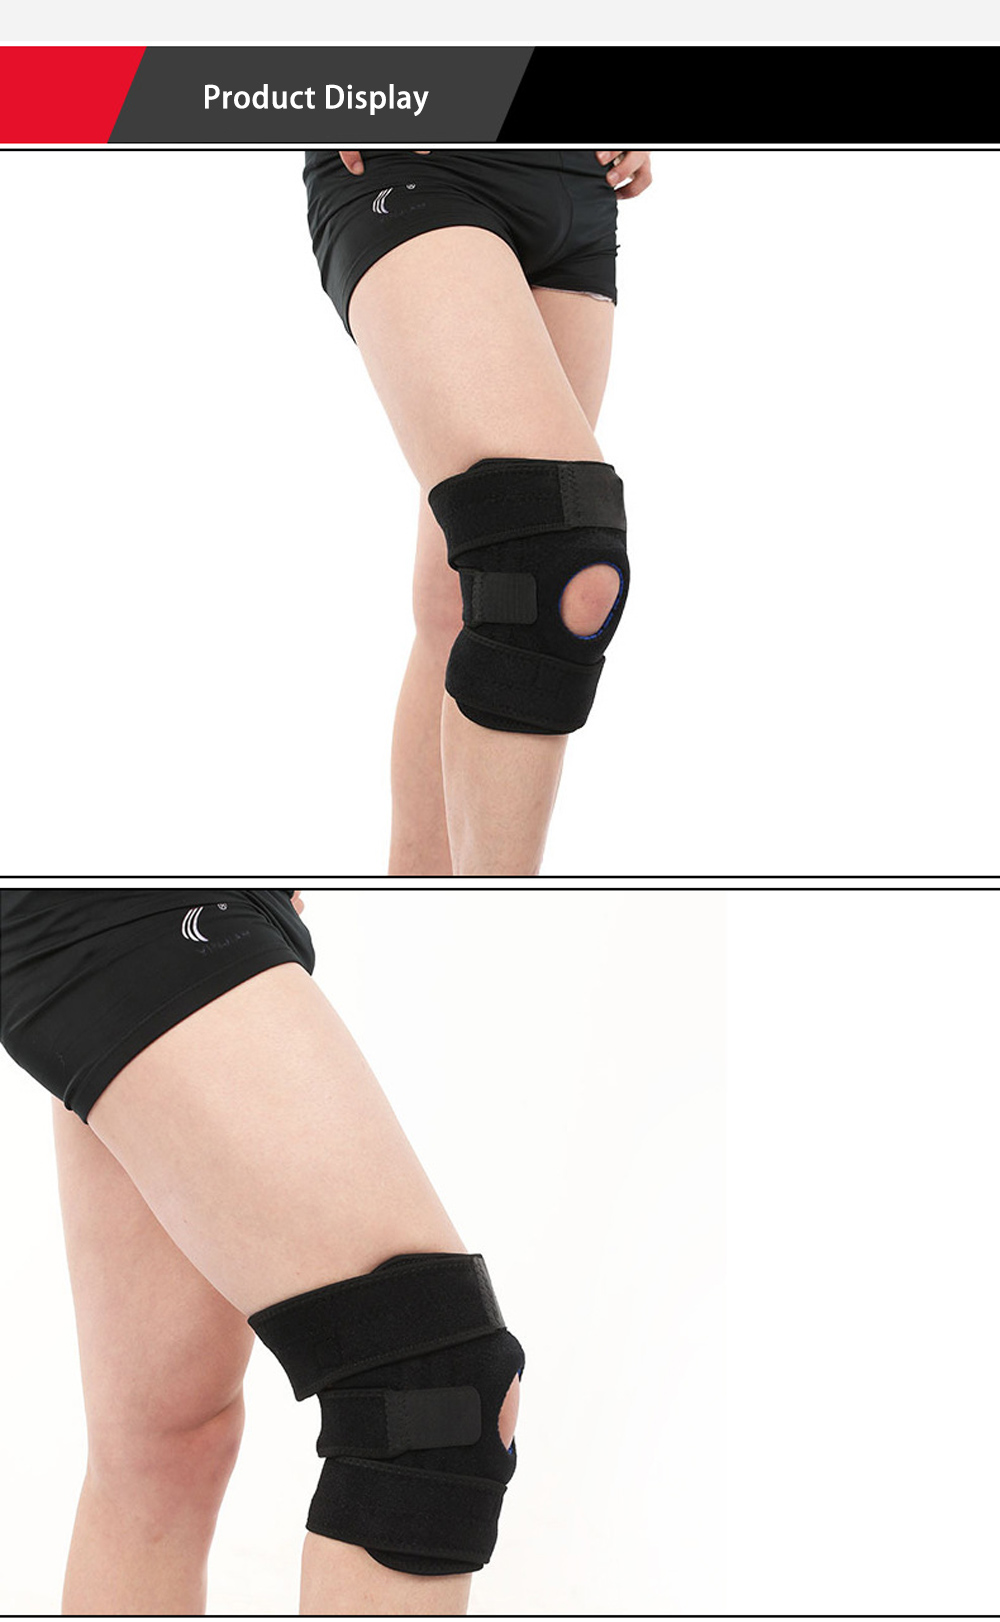 Elastic Knee Pads Adjustable Four Spring Safety Guard Strap for Outdoor Sports